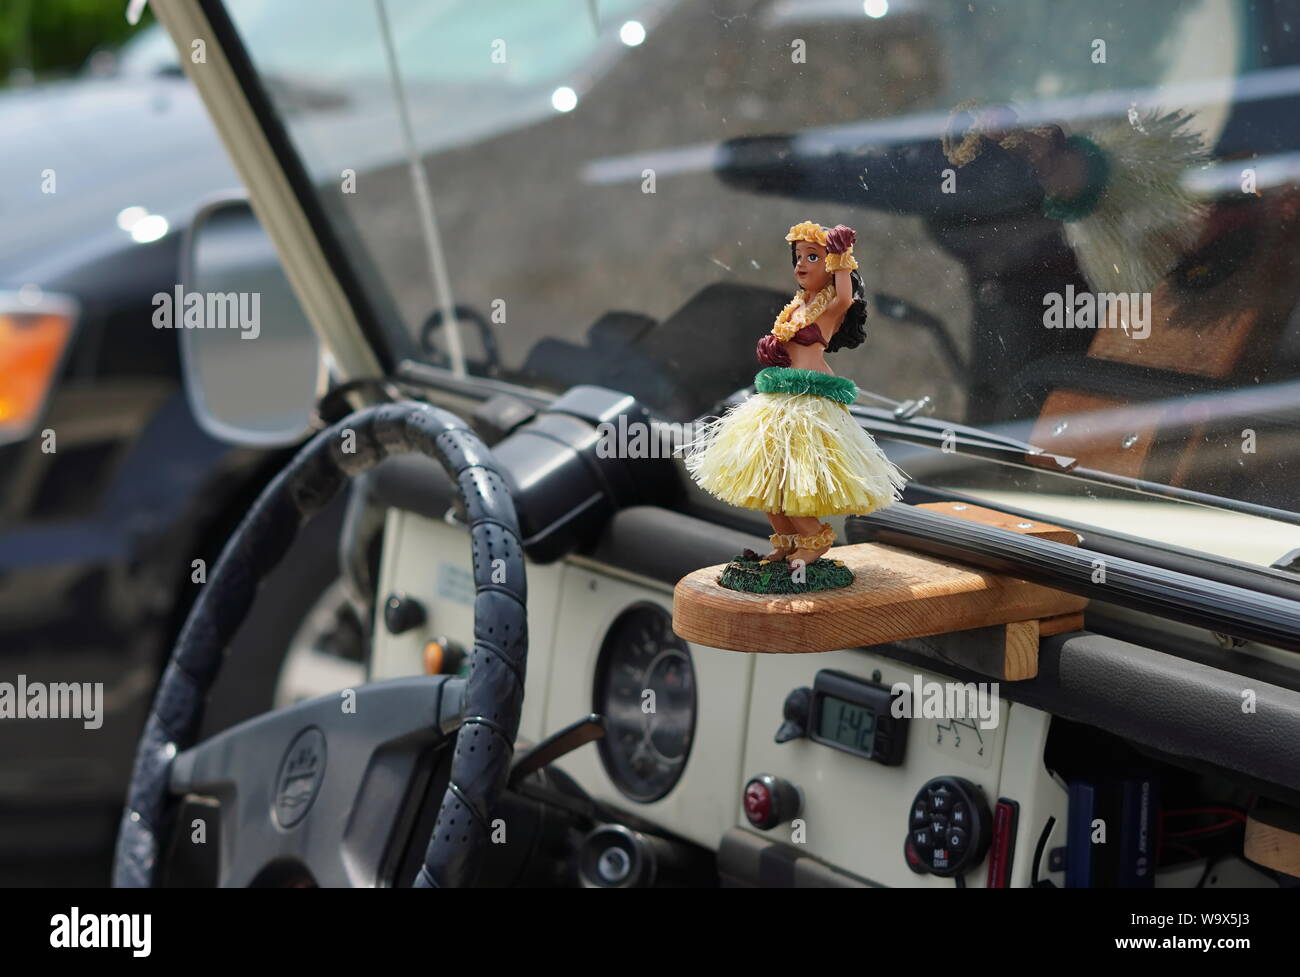 New London, CT / USA - June 22, 2019: Hula dancer ornament in a jeep wrangler with the top down Stock Photo